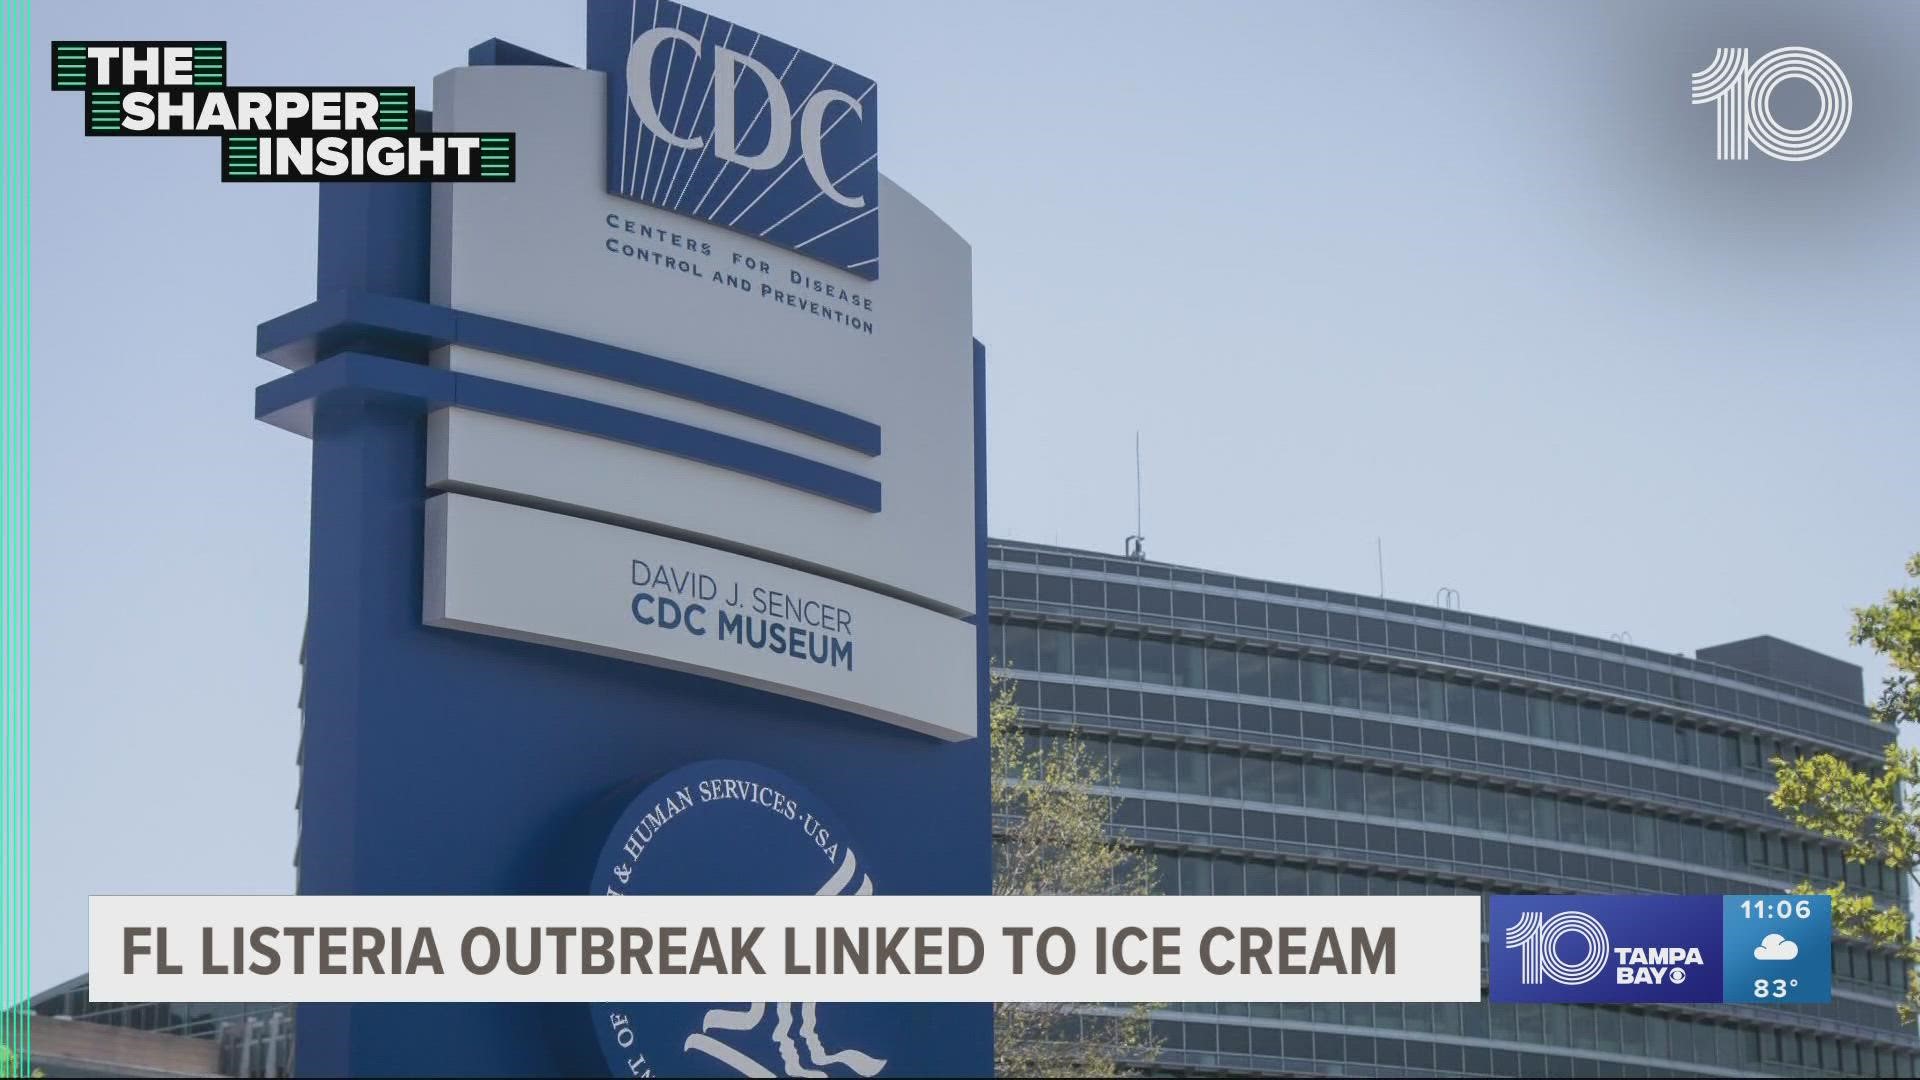 A top food safety expert is representing the family of the woman who died in the Listeria outbreak linked to a Sarasota ice cream company.